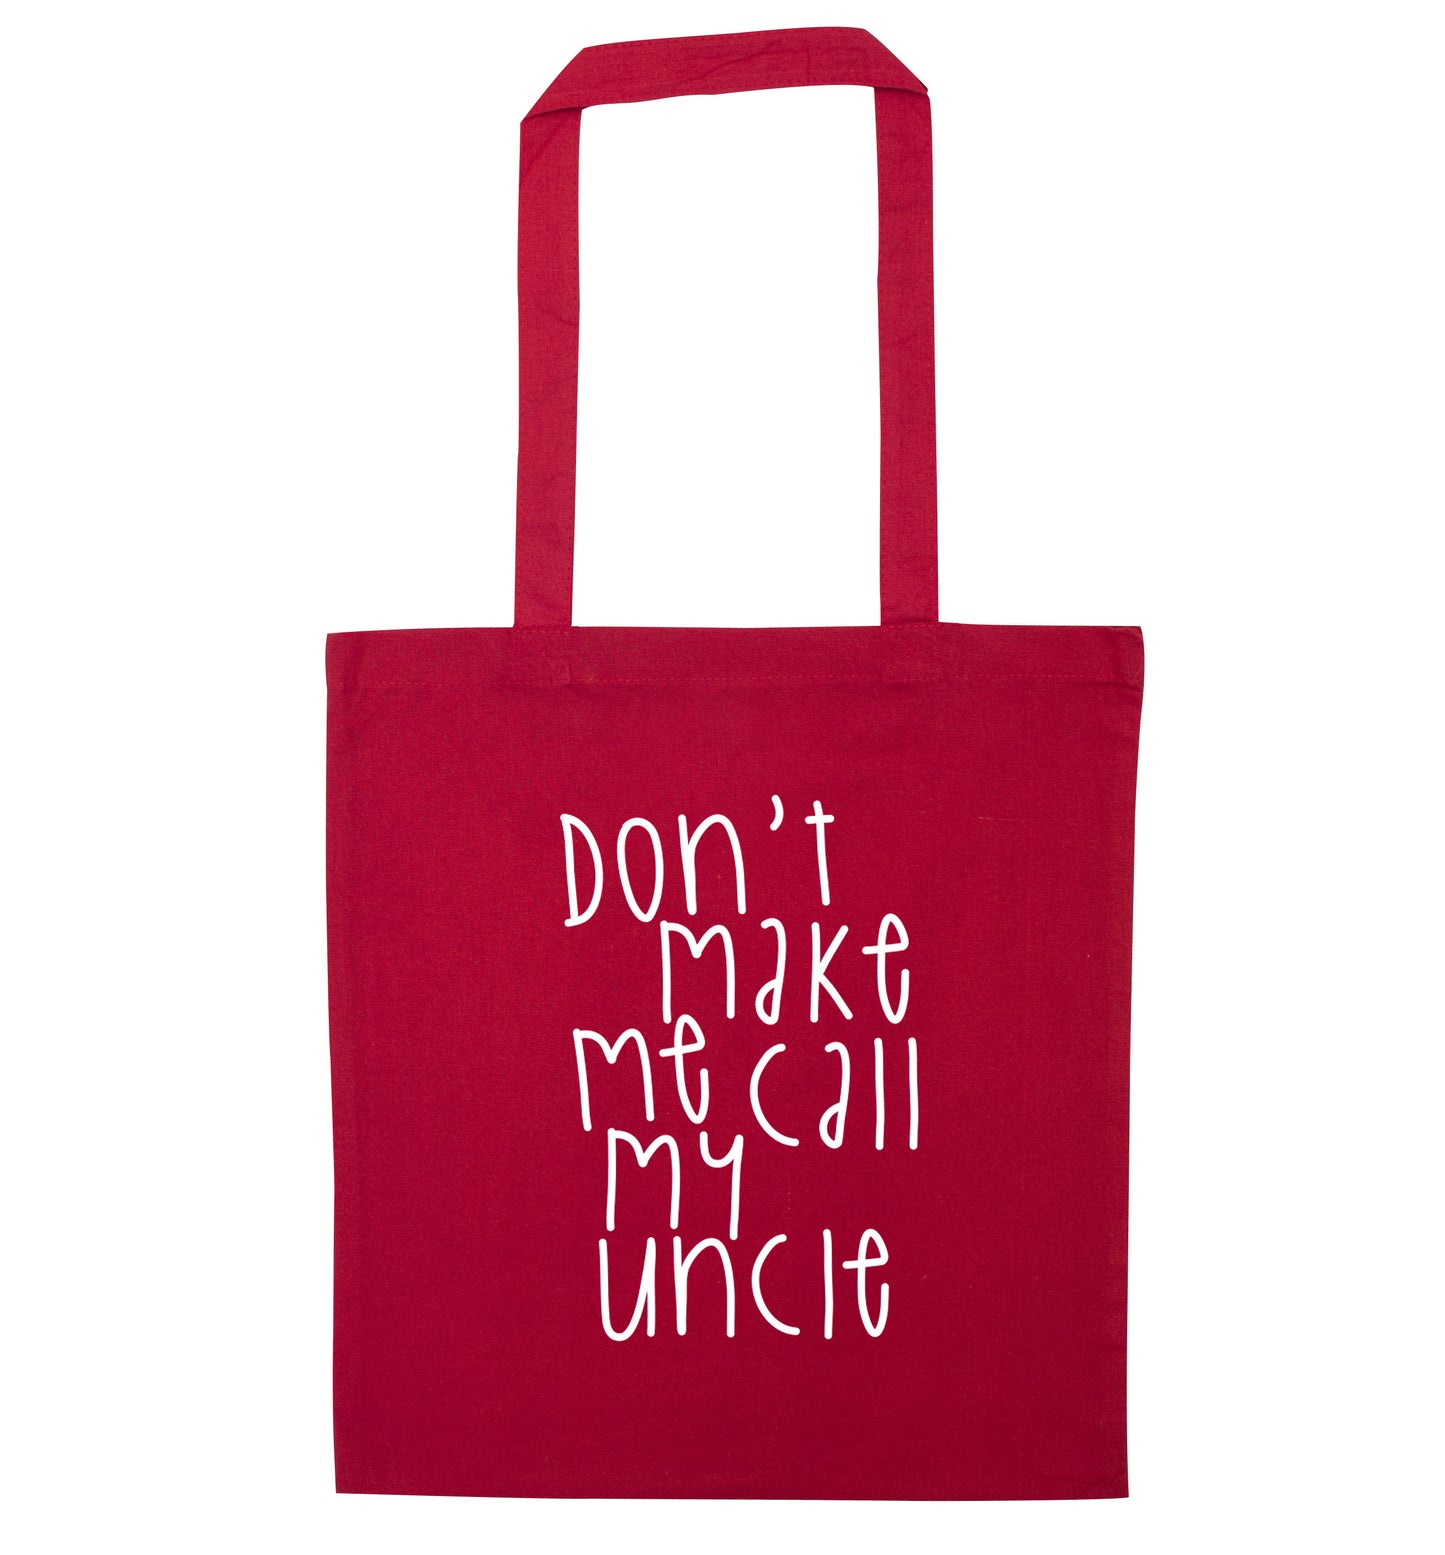 Don't make me call my uncle red tote bag